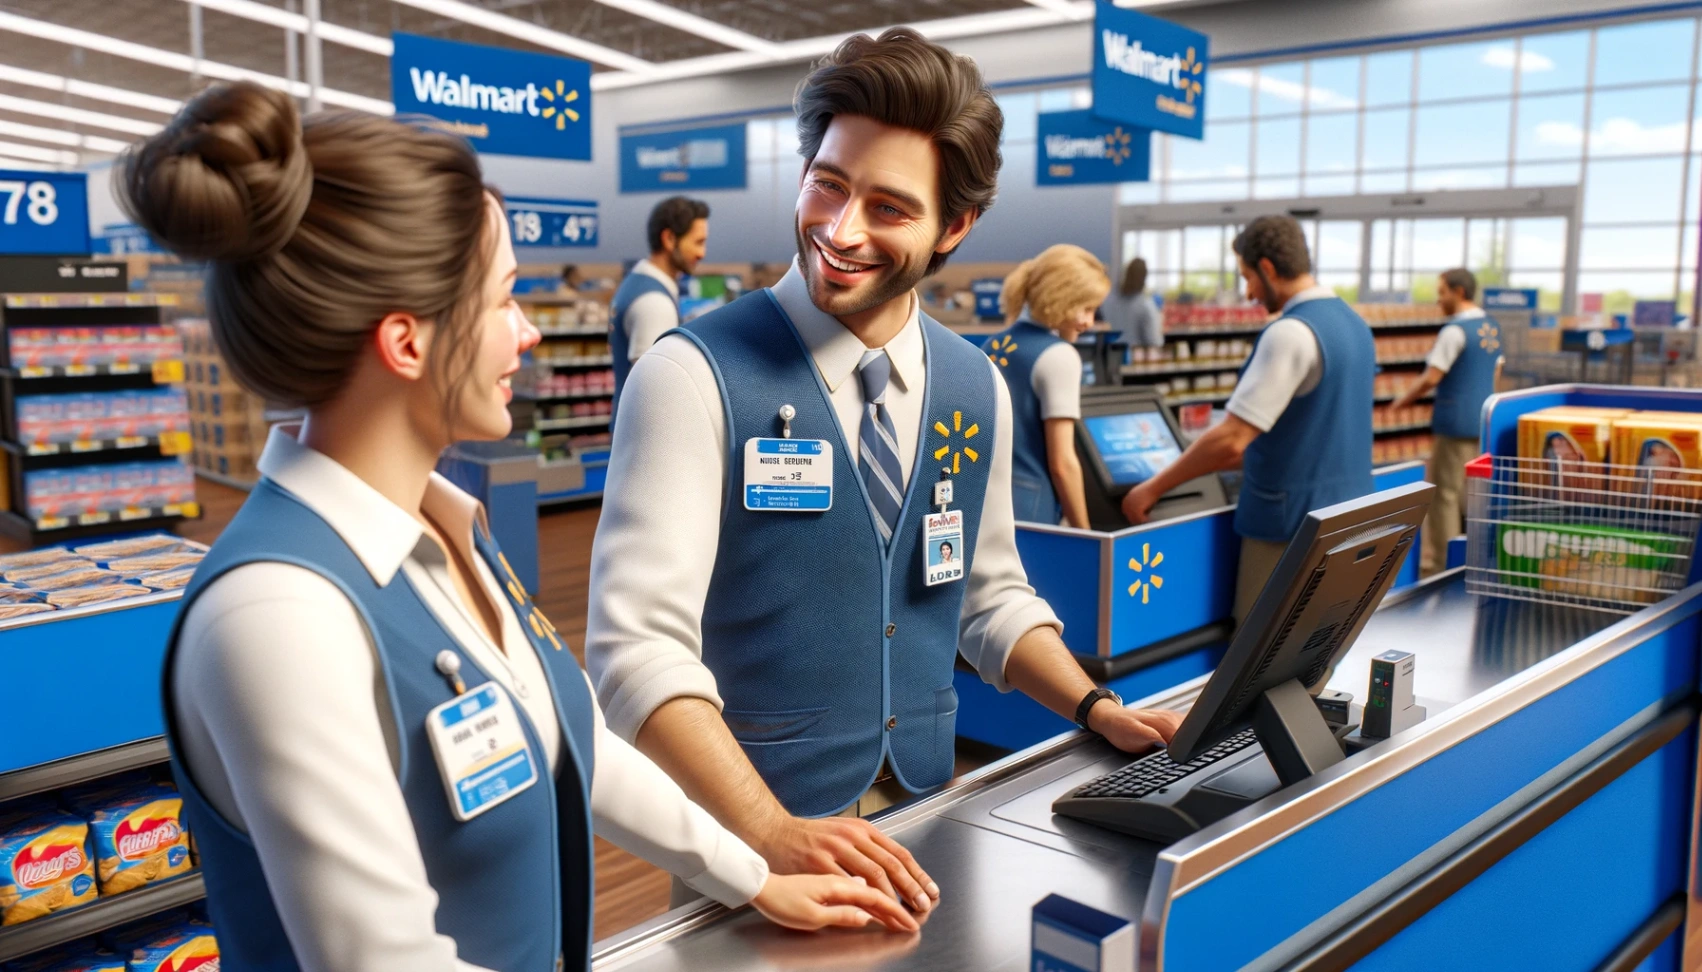 Walmart - Discover How to Apply For Jobs